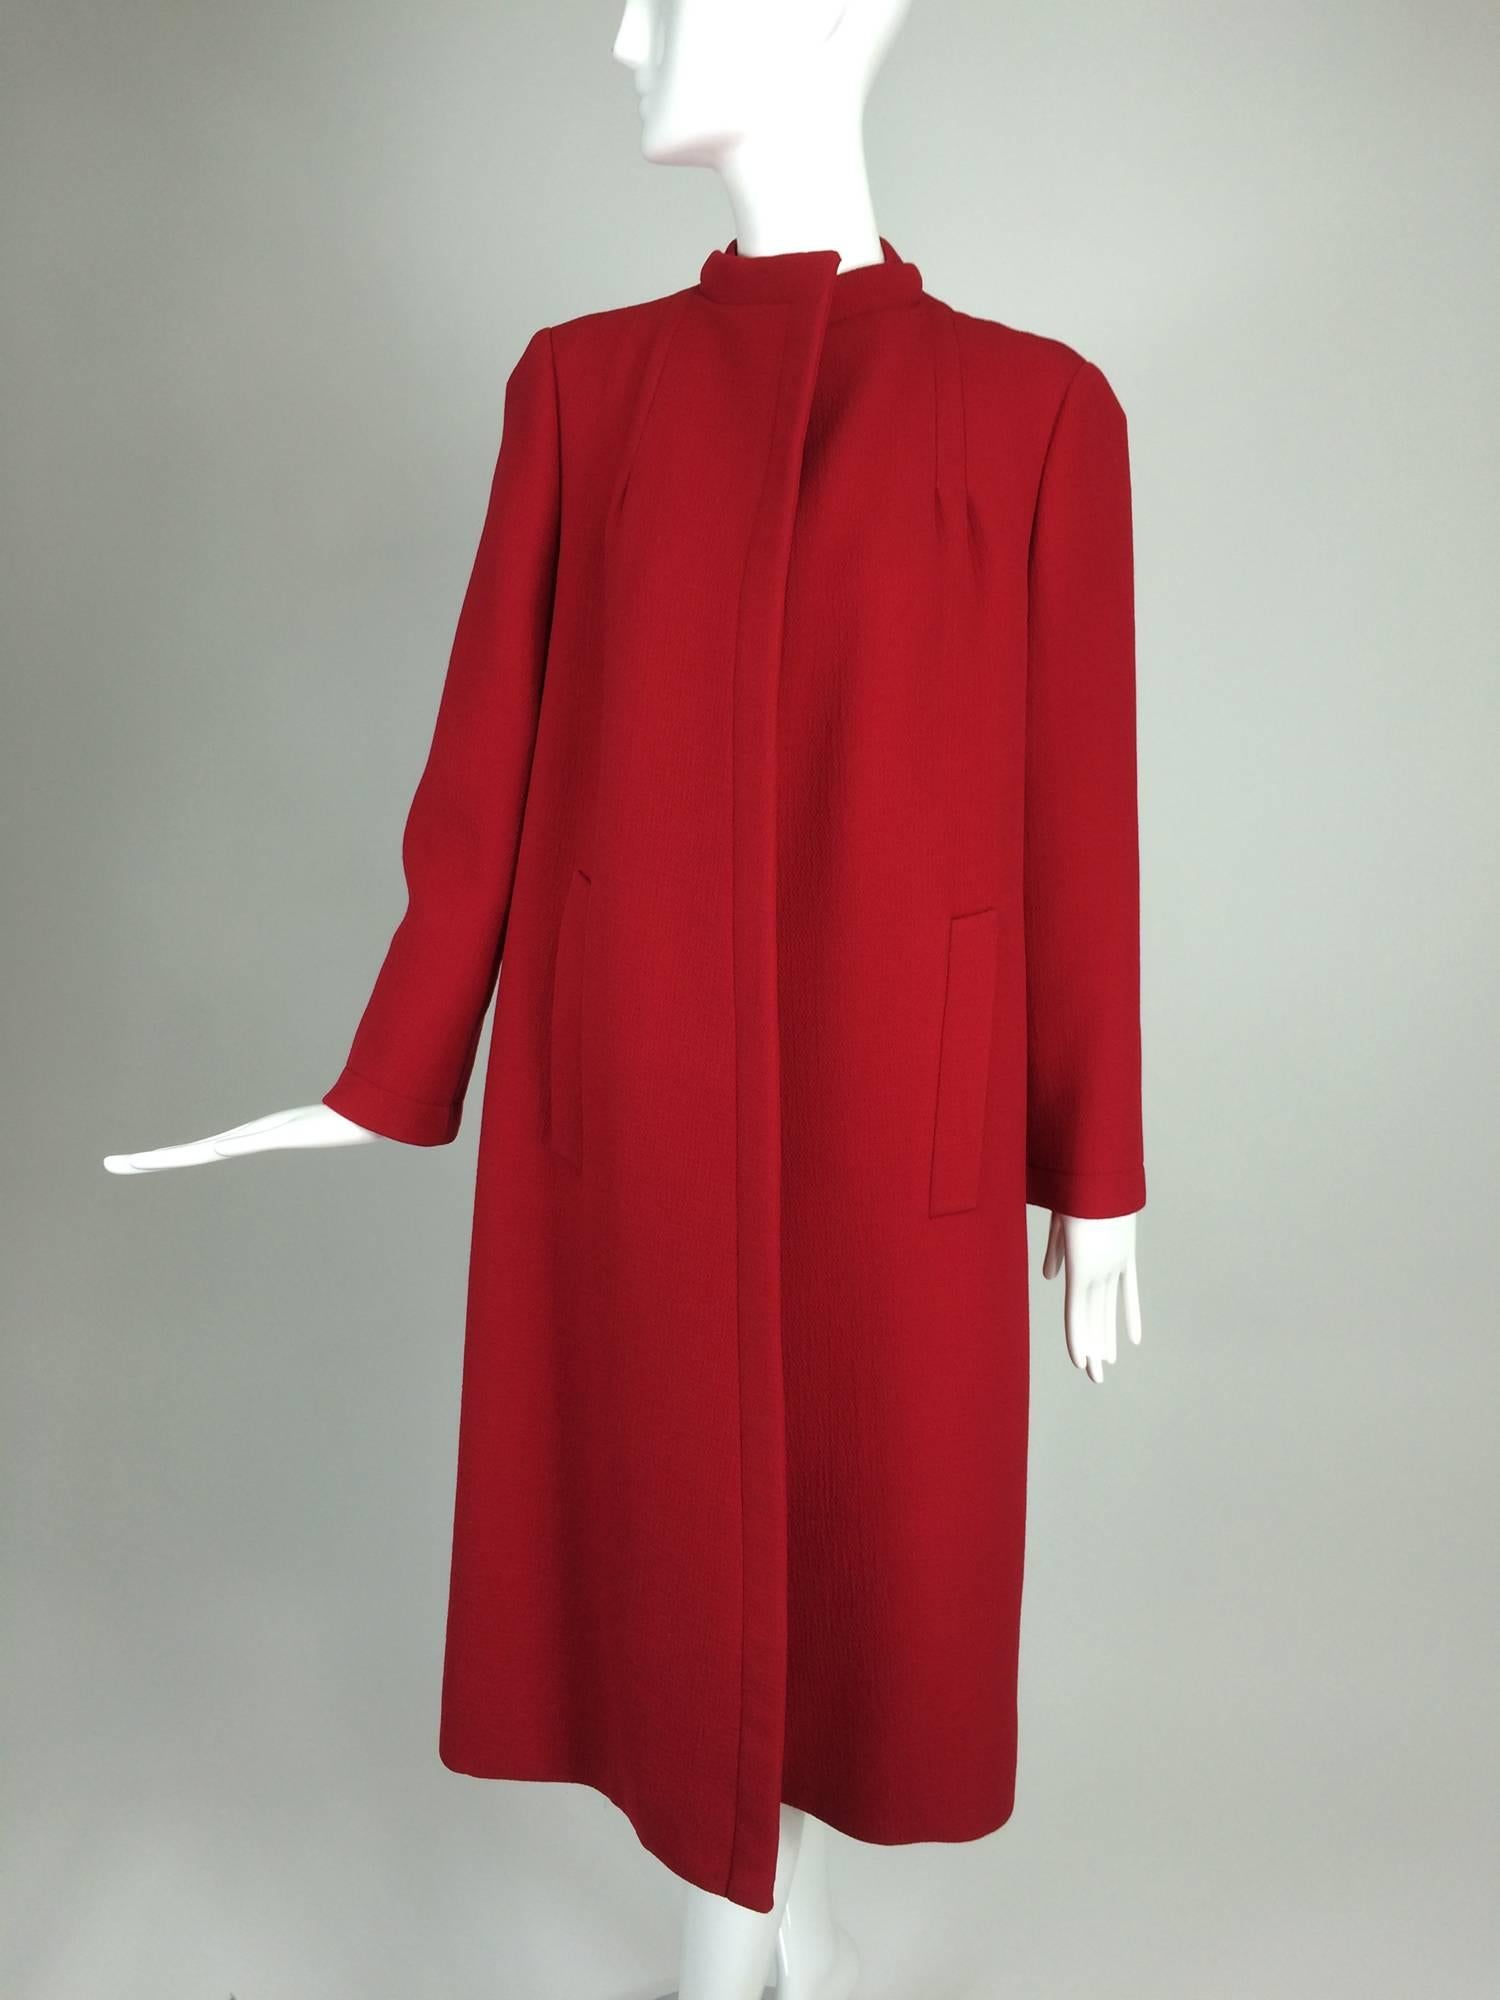 Pauline Trigere chic cherry red wool open front coat 1950s 5